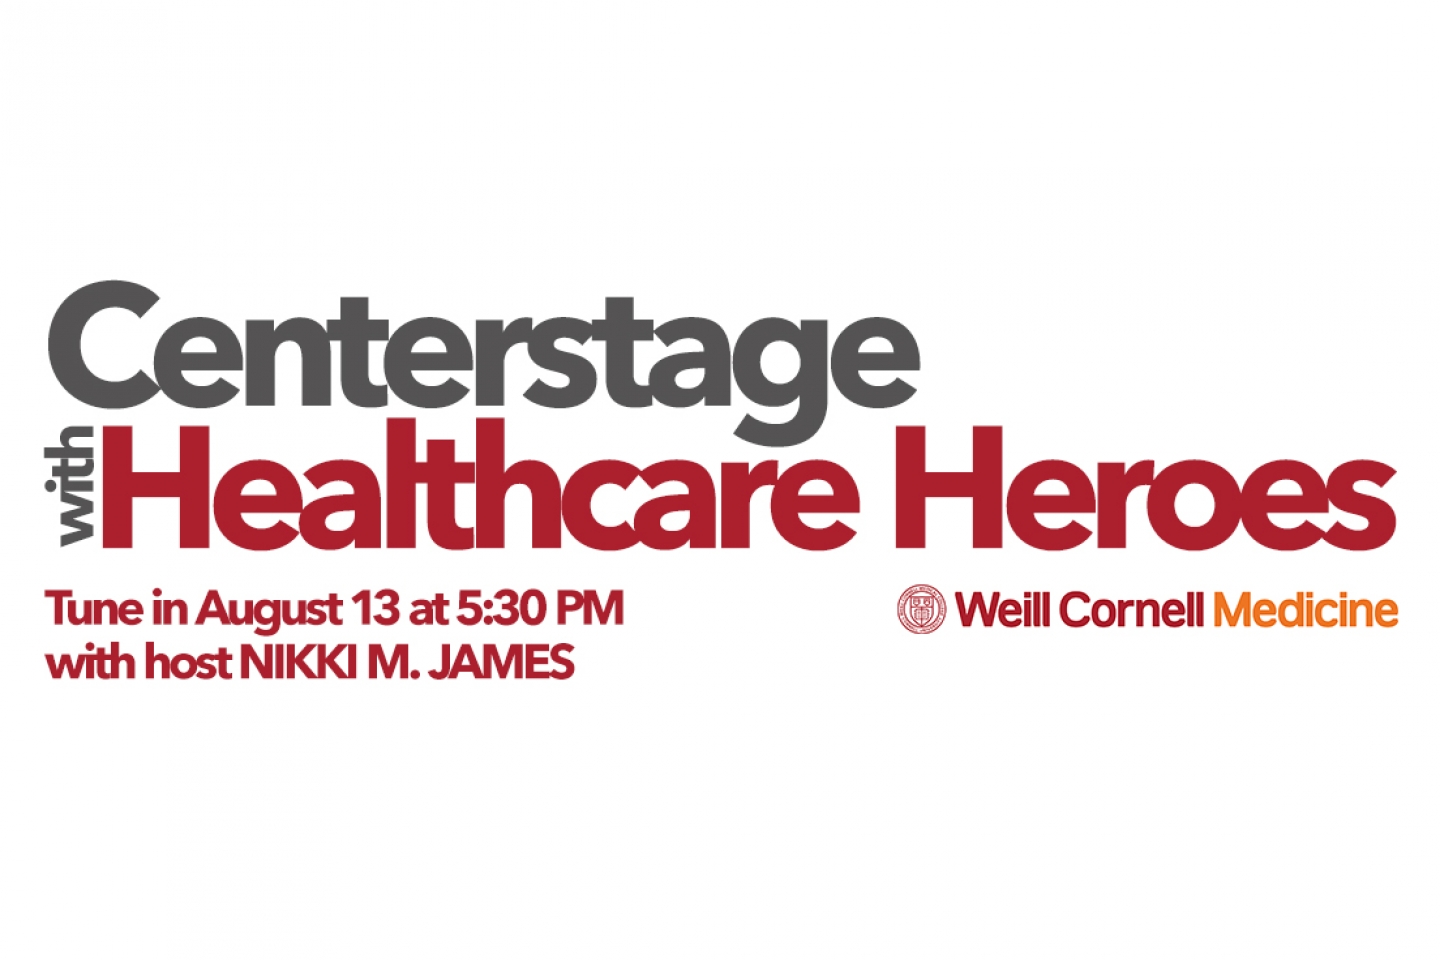 centerstage with healthcare heroes event banner